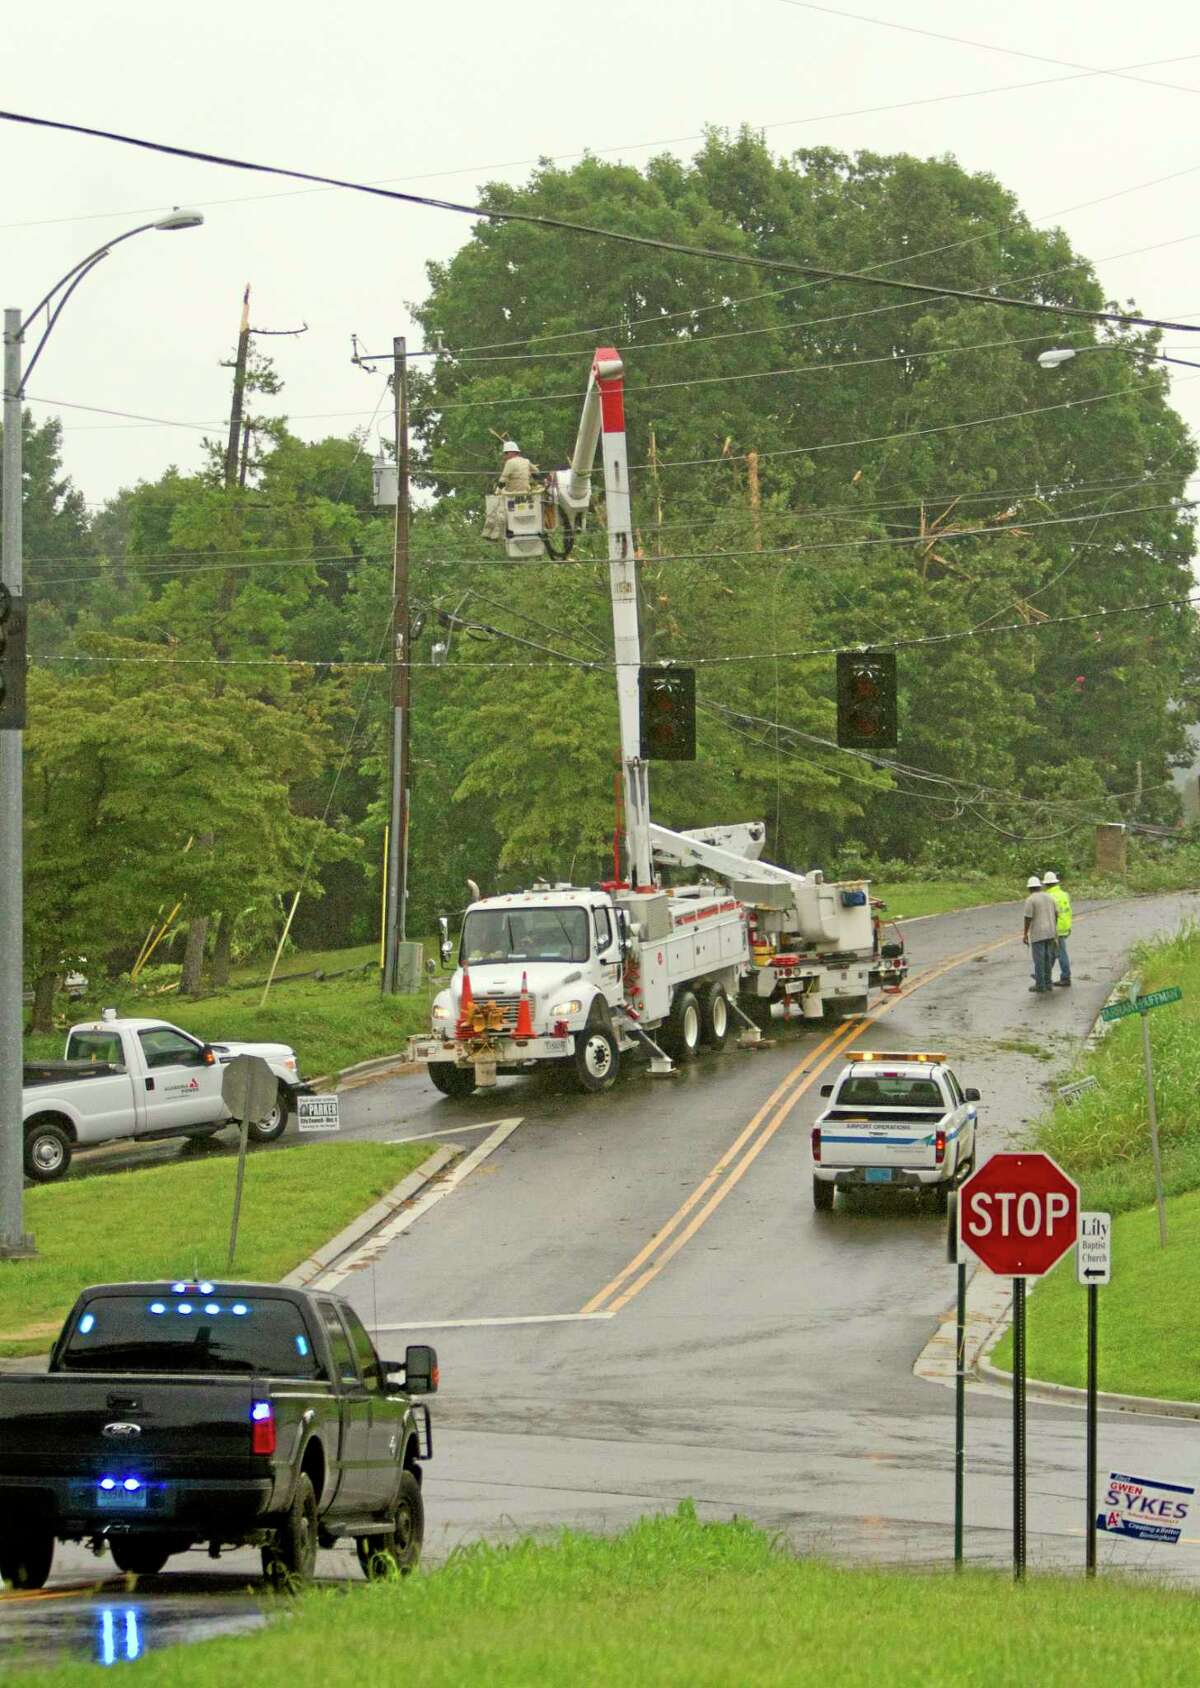 Alabama Power Company crews work on power lines knocked down by a UPS cargo plane which crashed at the Birmingham International airport in Birmingham, Ala. on Wednesday, Aug. 14, 2013. (AP Photo/Butch Dill)